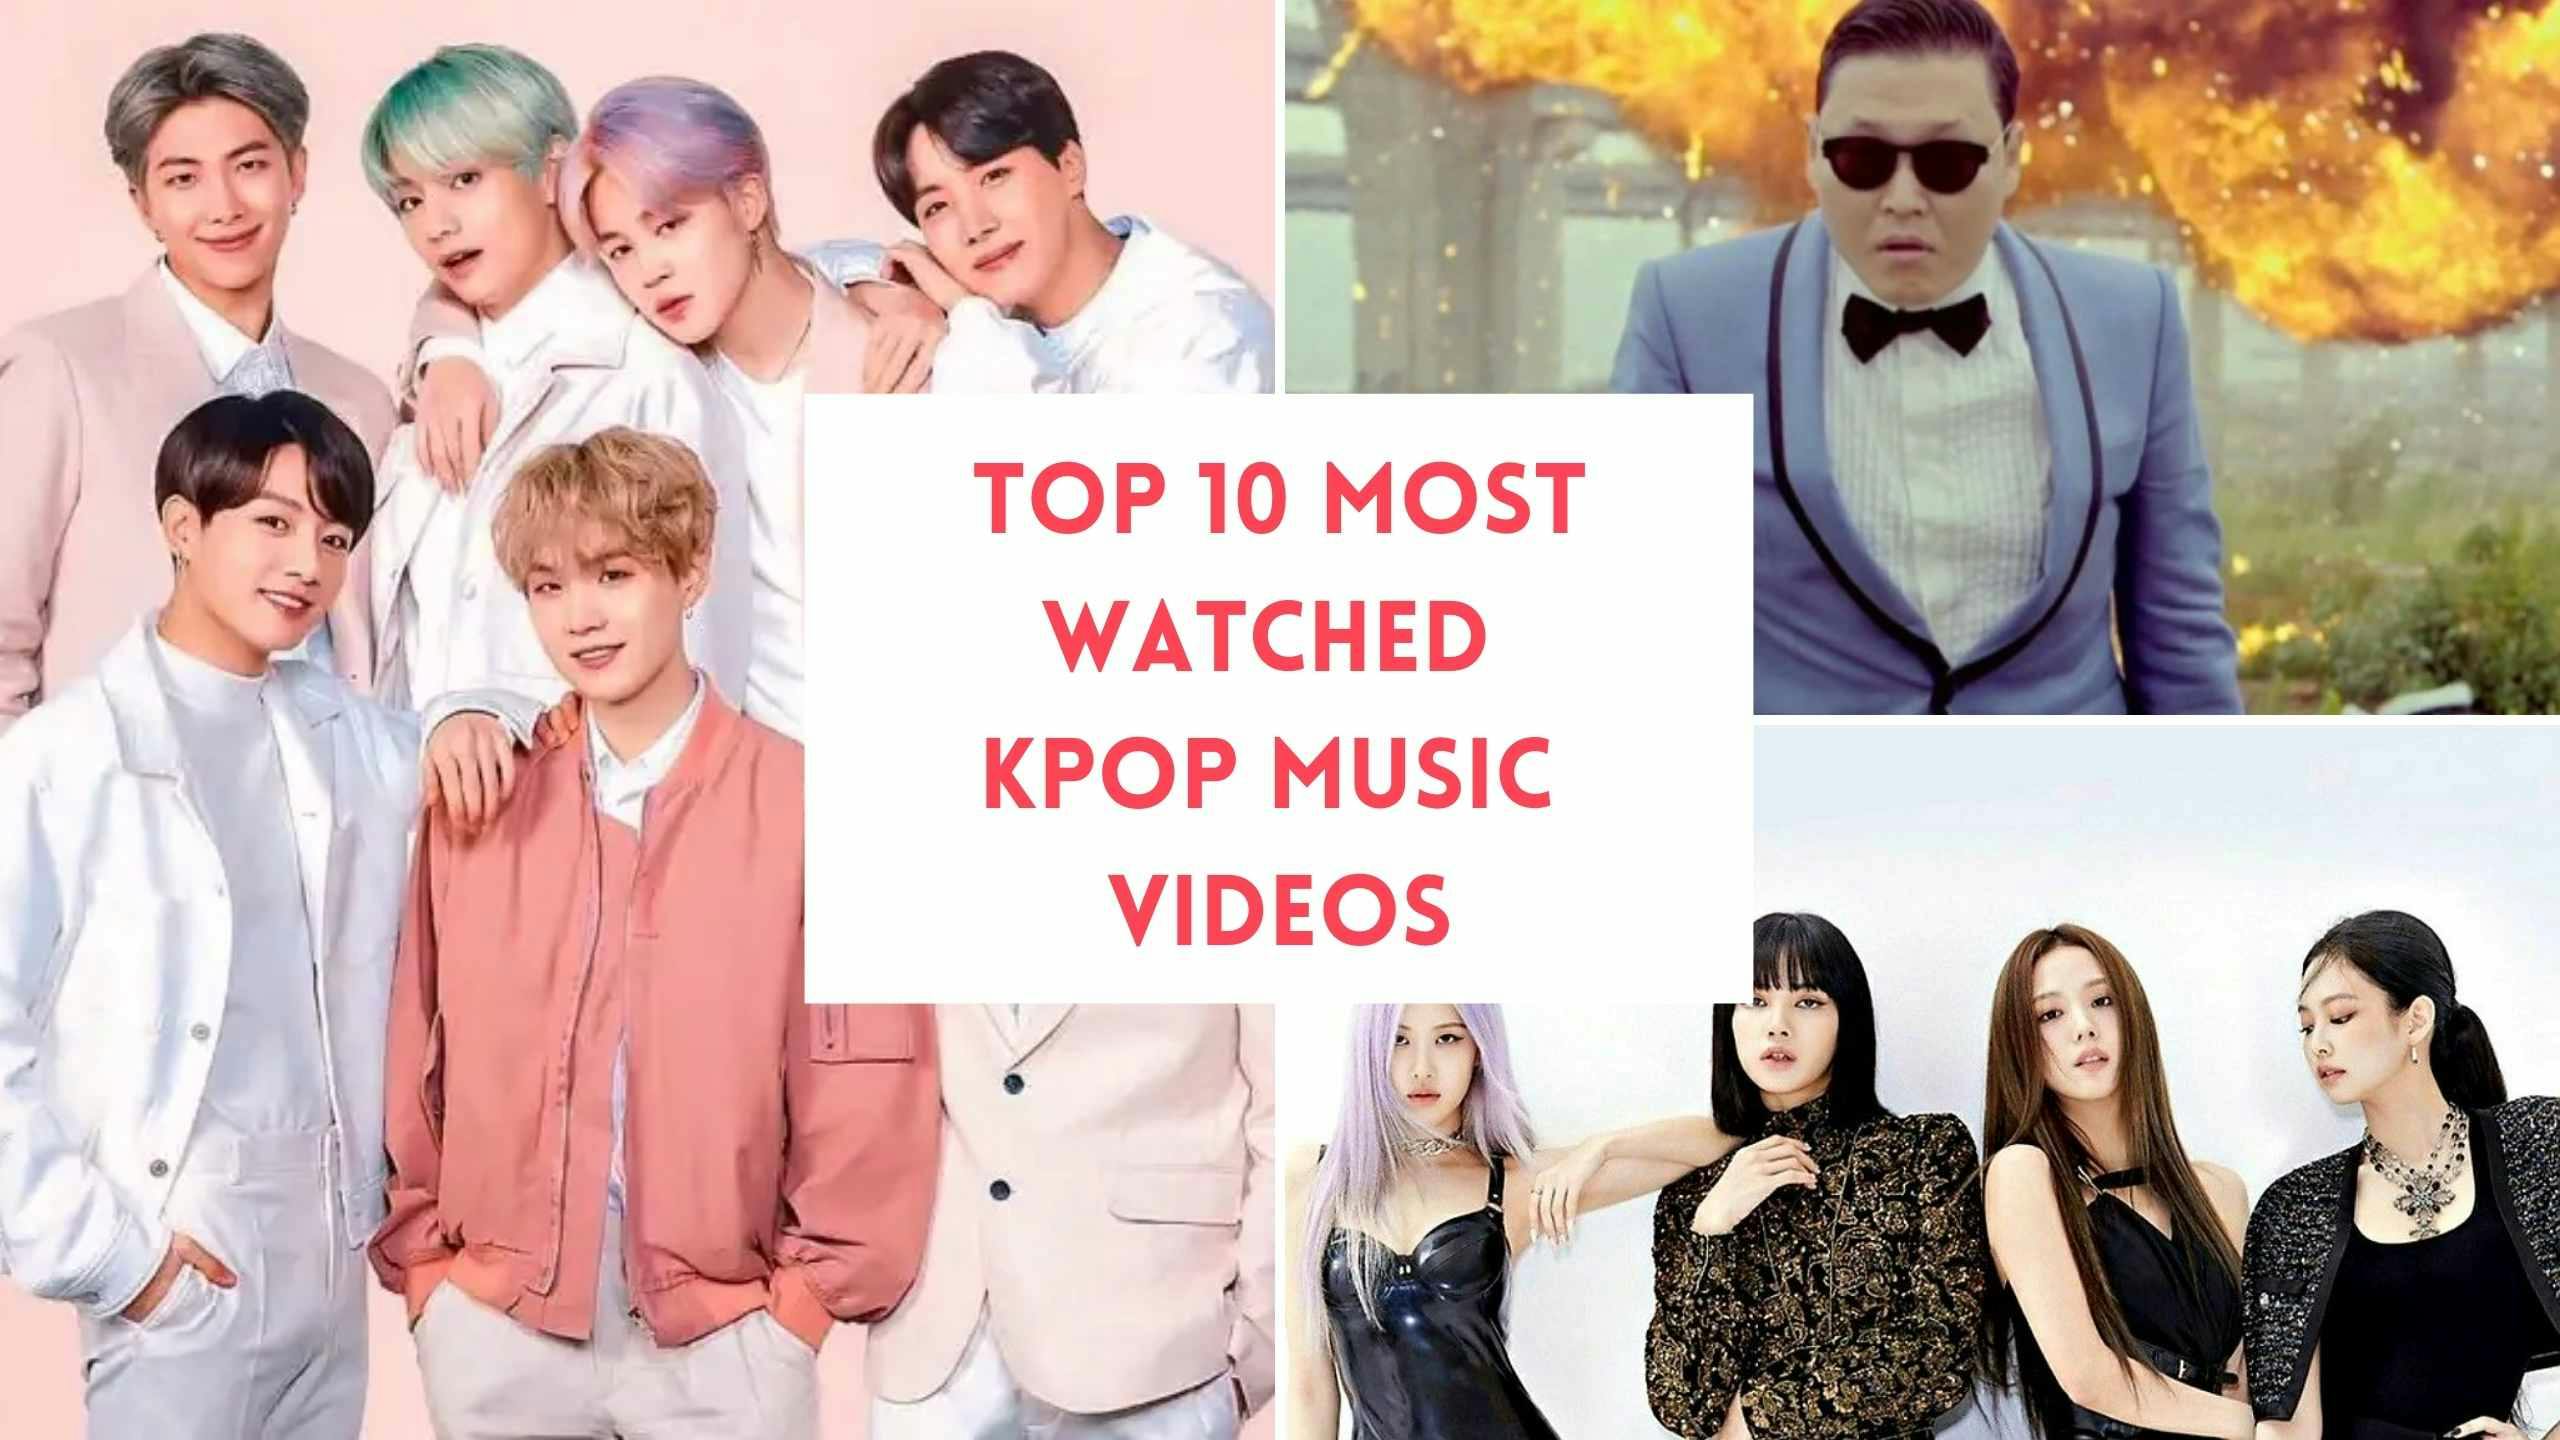 Top 10 Most-Watched Kpop Music Videos of All Time on YouTube - 2021